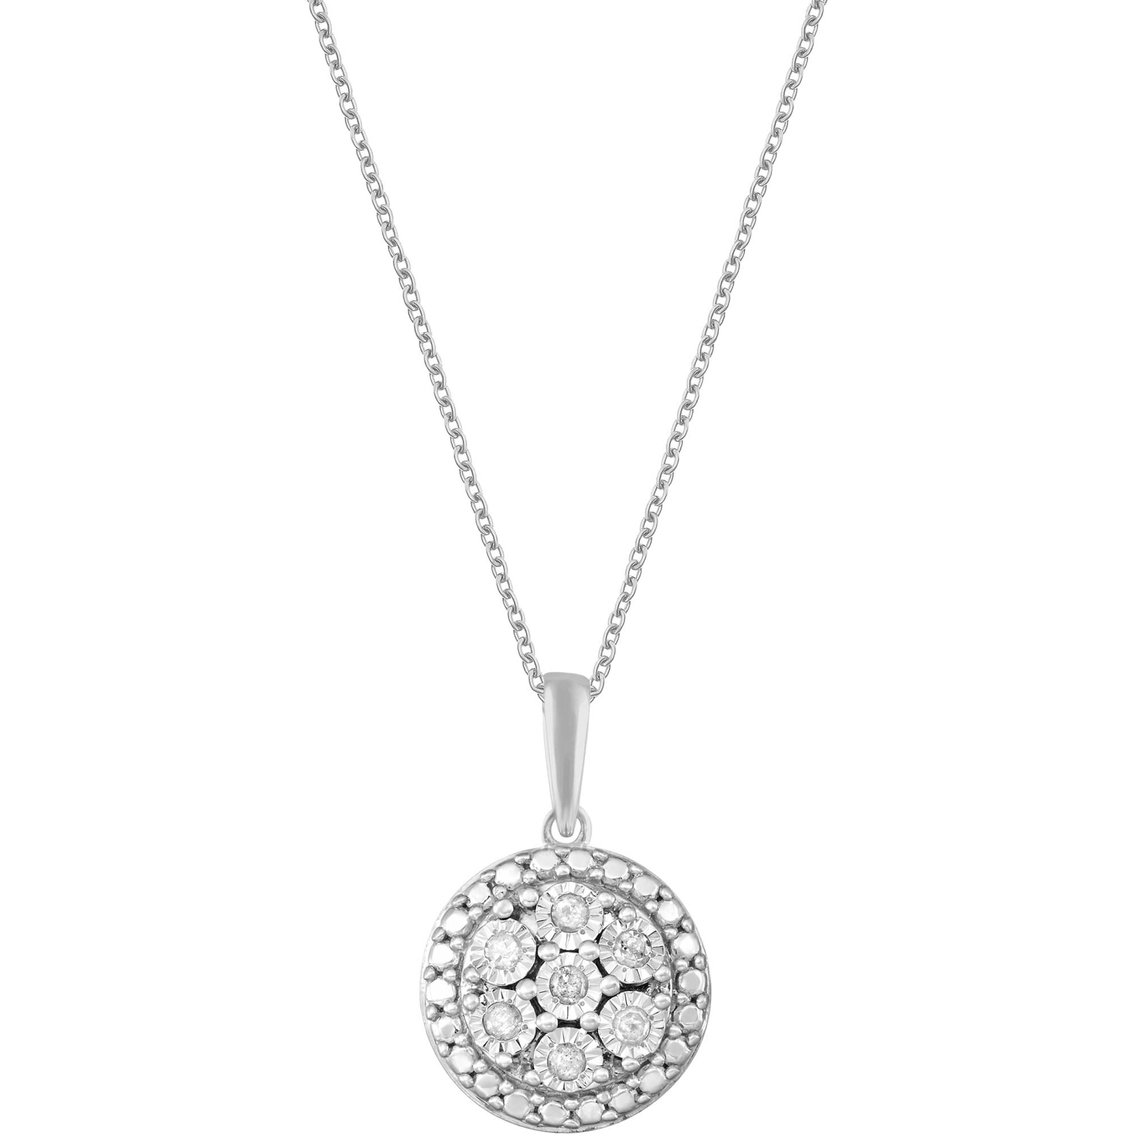 Sterling Silver 1/5 CTW Diamond Earring and Pendant Set - Image 2 of 3